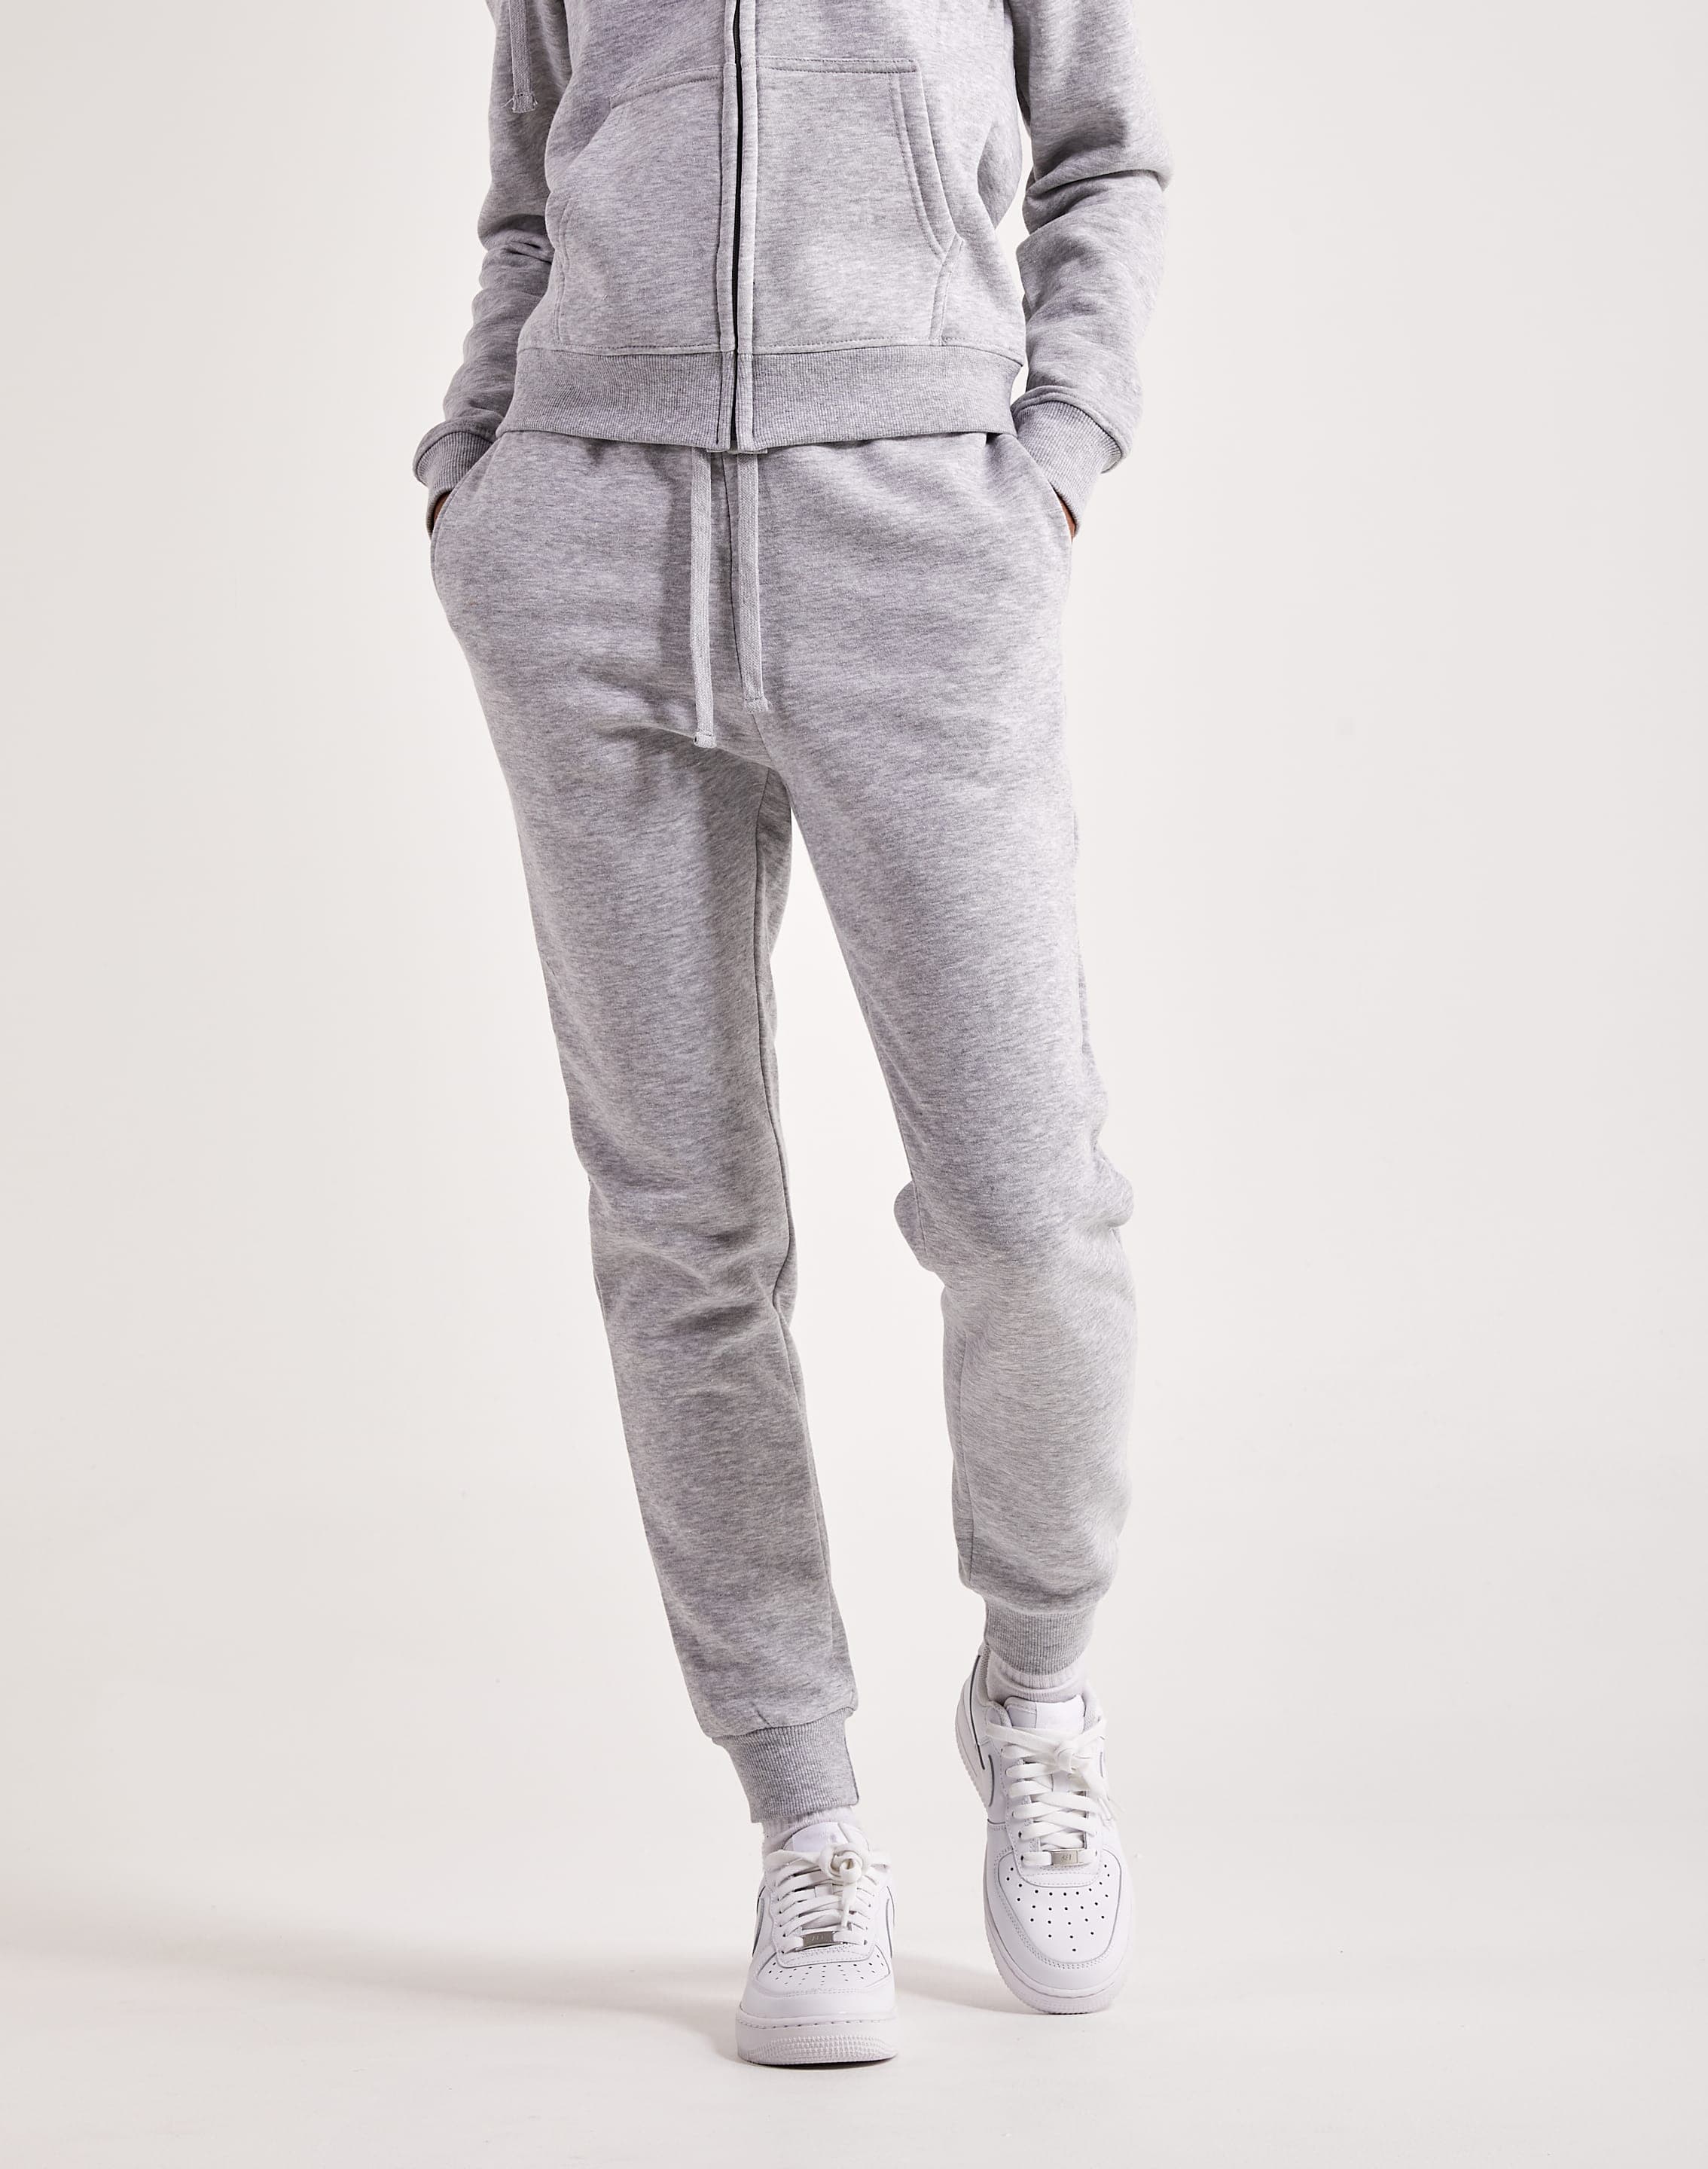 Girls' Fleece Joggers - All in Motion Heathered Gray XS 1 ct